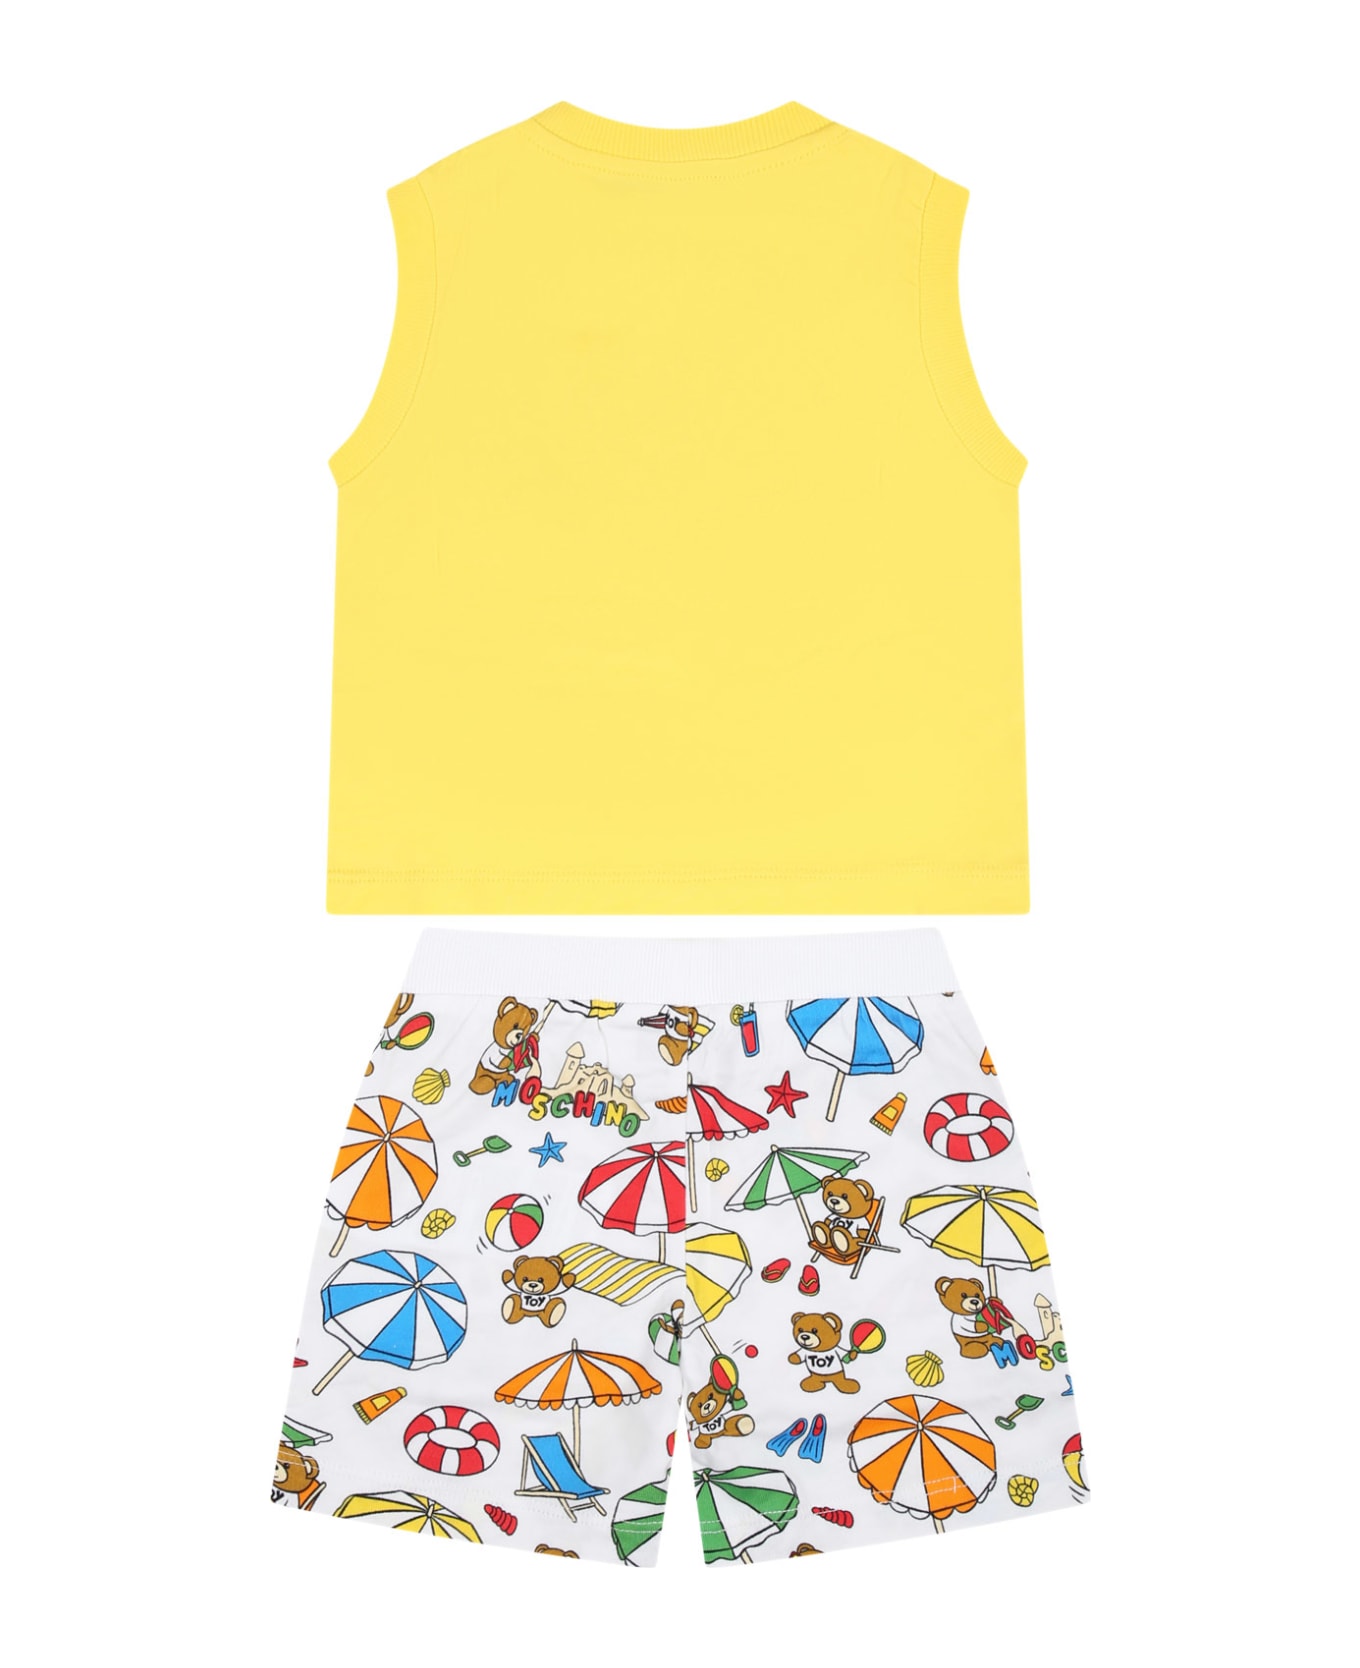 Moschino Yellow Sports Suit For Baby Boy With Teddy Bear - Yellow